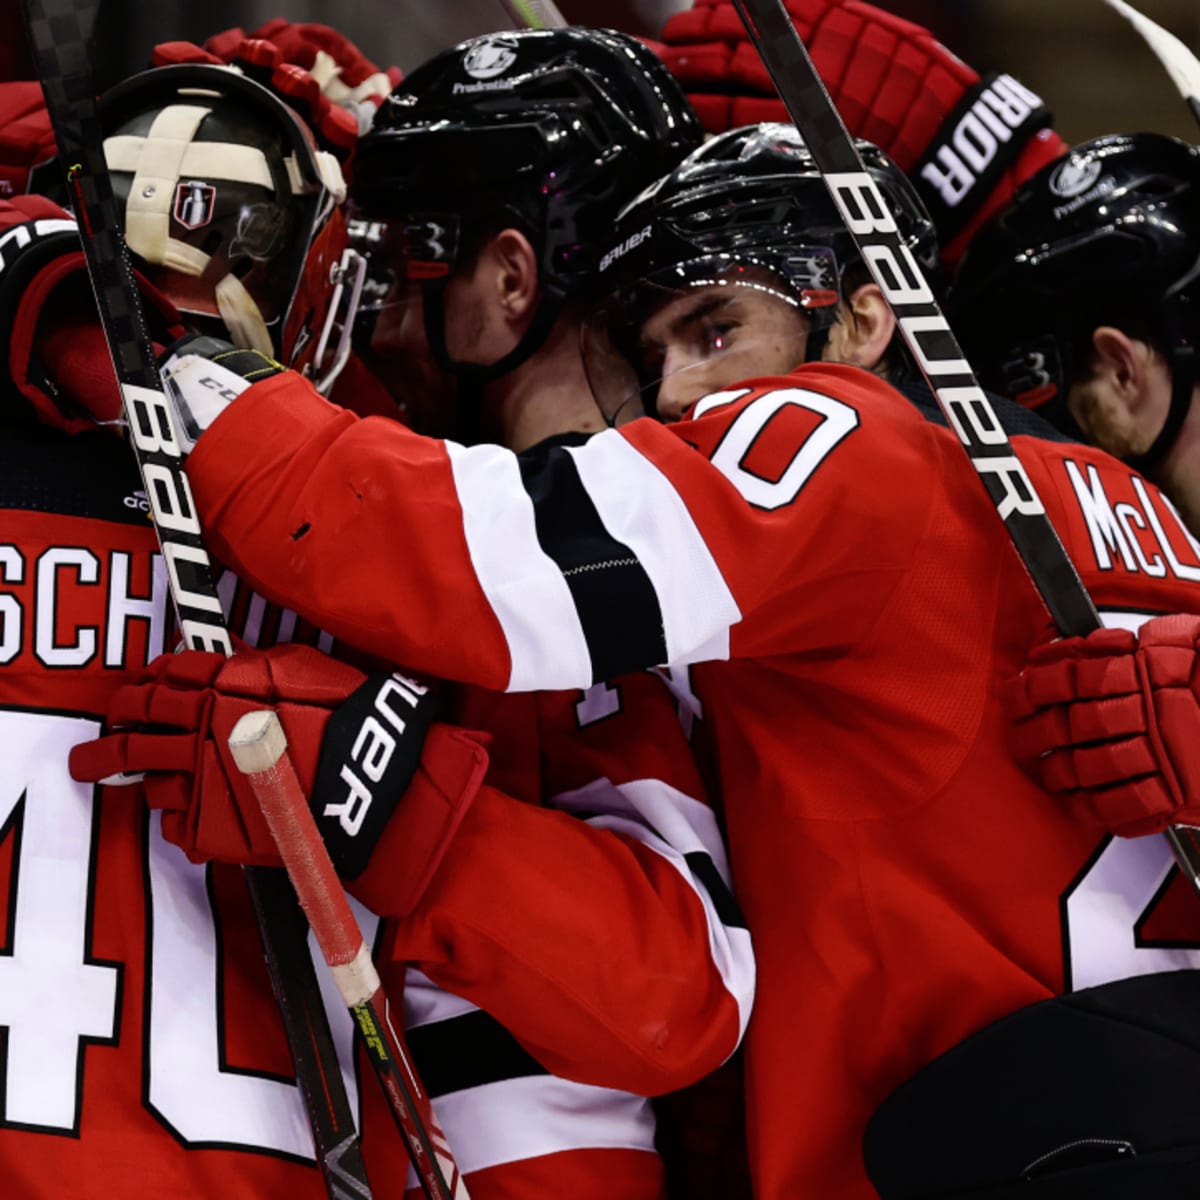 Devils win first playoff series in 11 years, triumph over Rangers